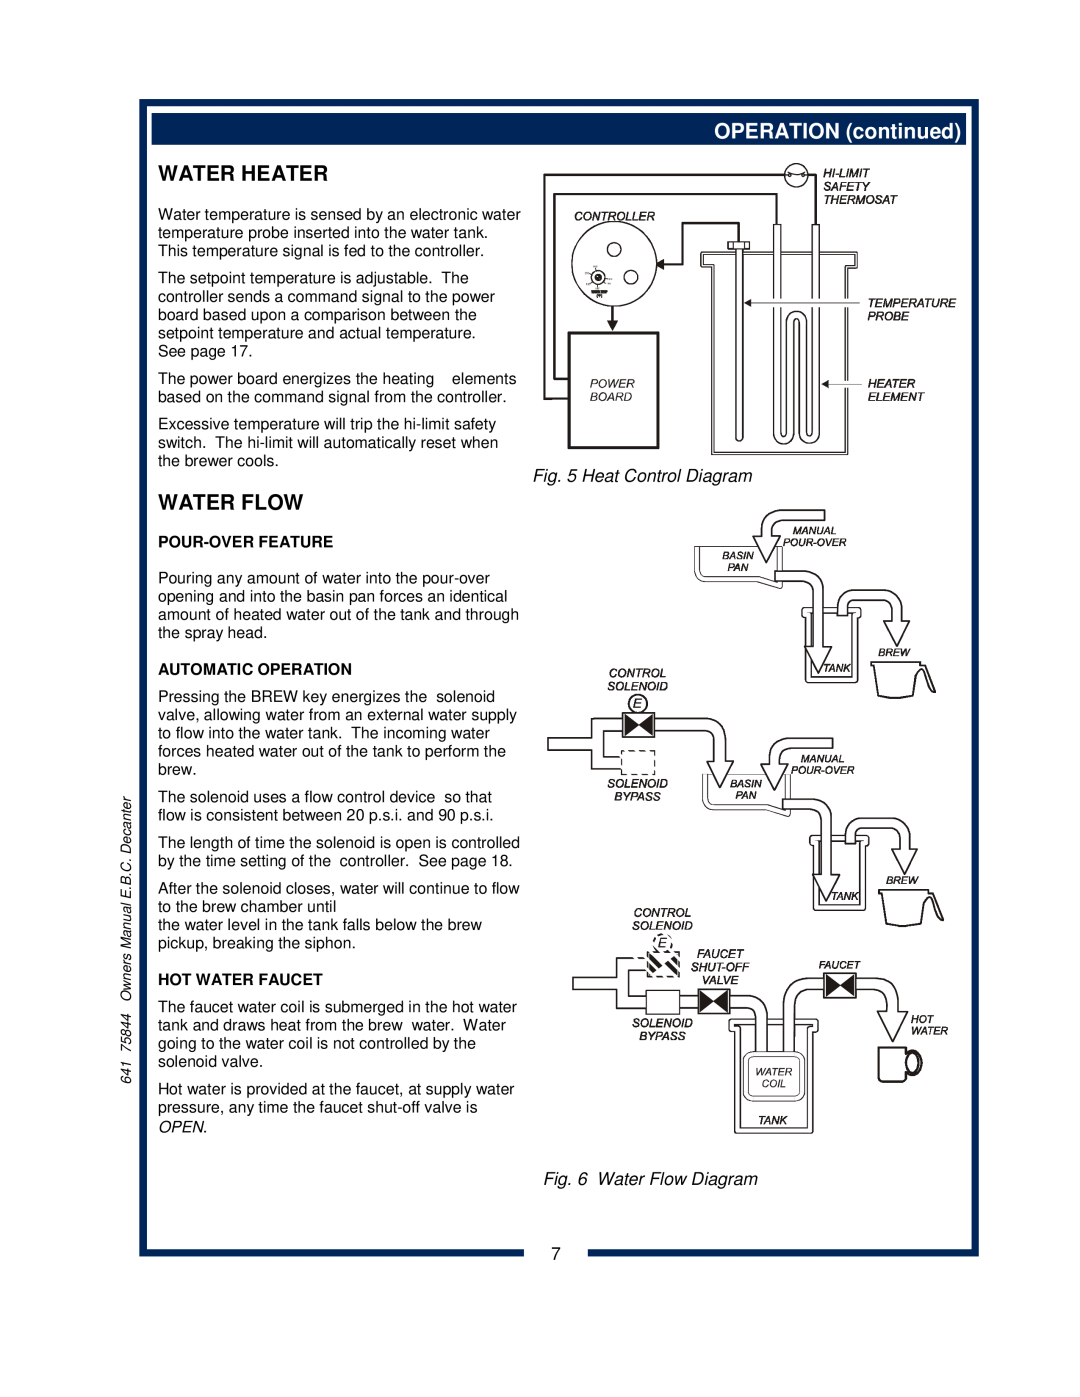 Bloomfield 1012 OPERATION continued, Water Heater, Heat Control Diagram, Water Flow Diagram, Pour-Over Feature, Open 